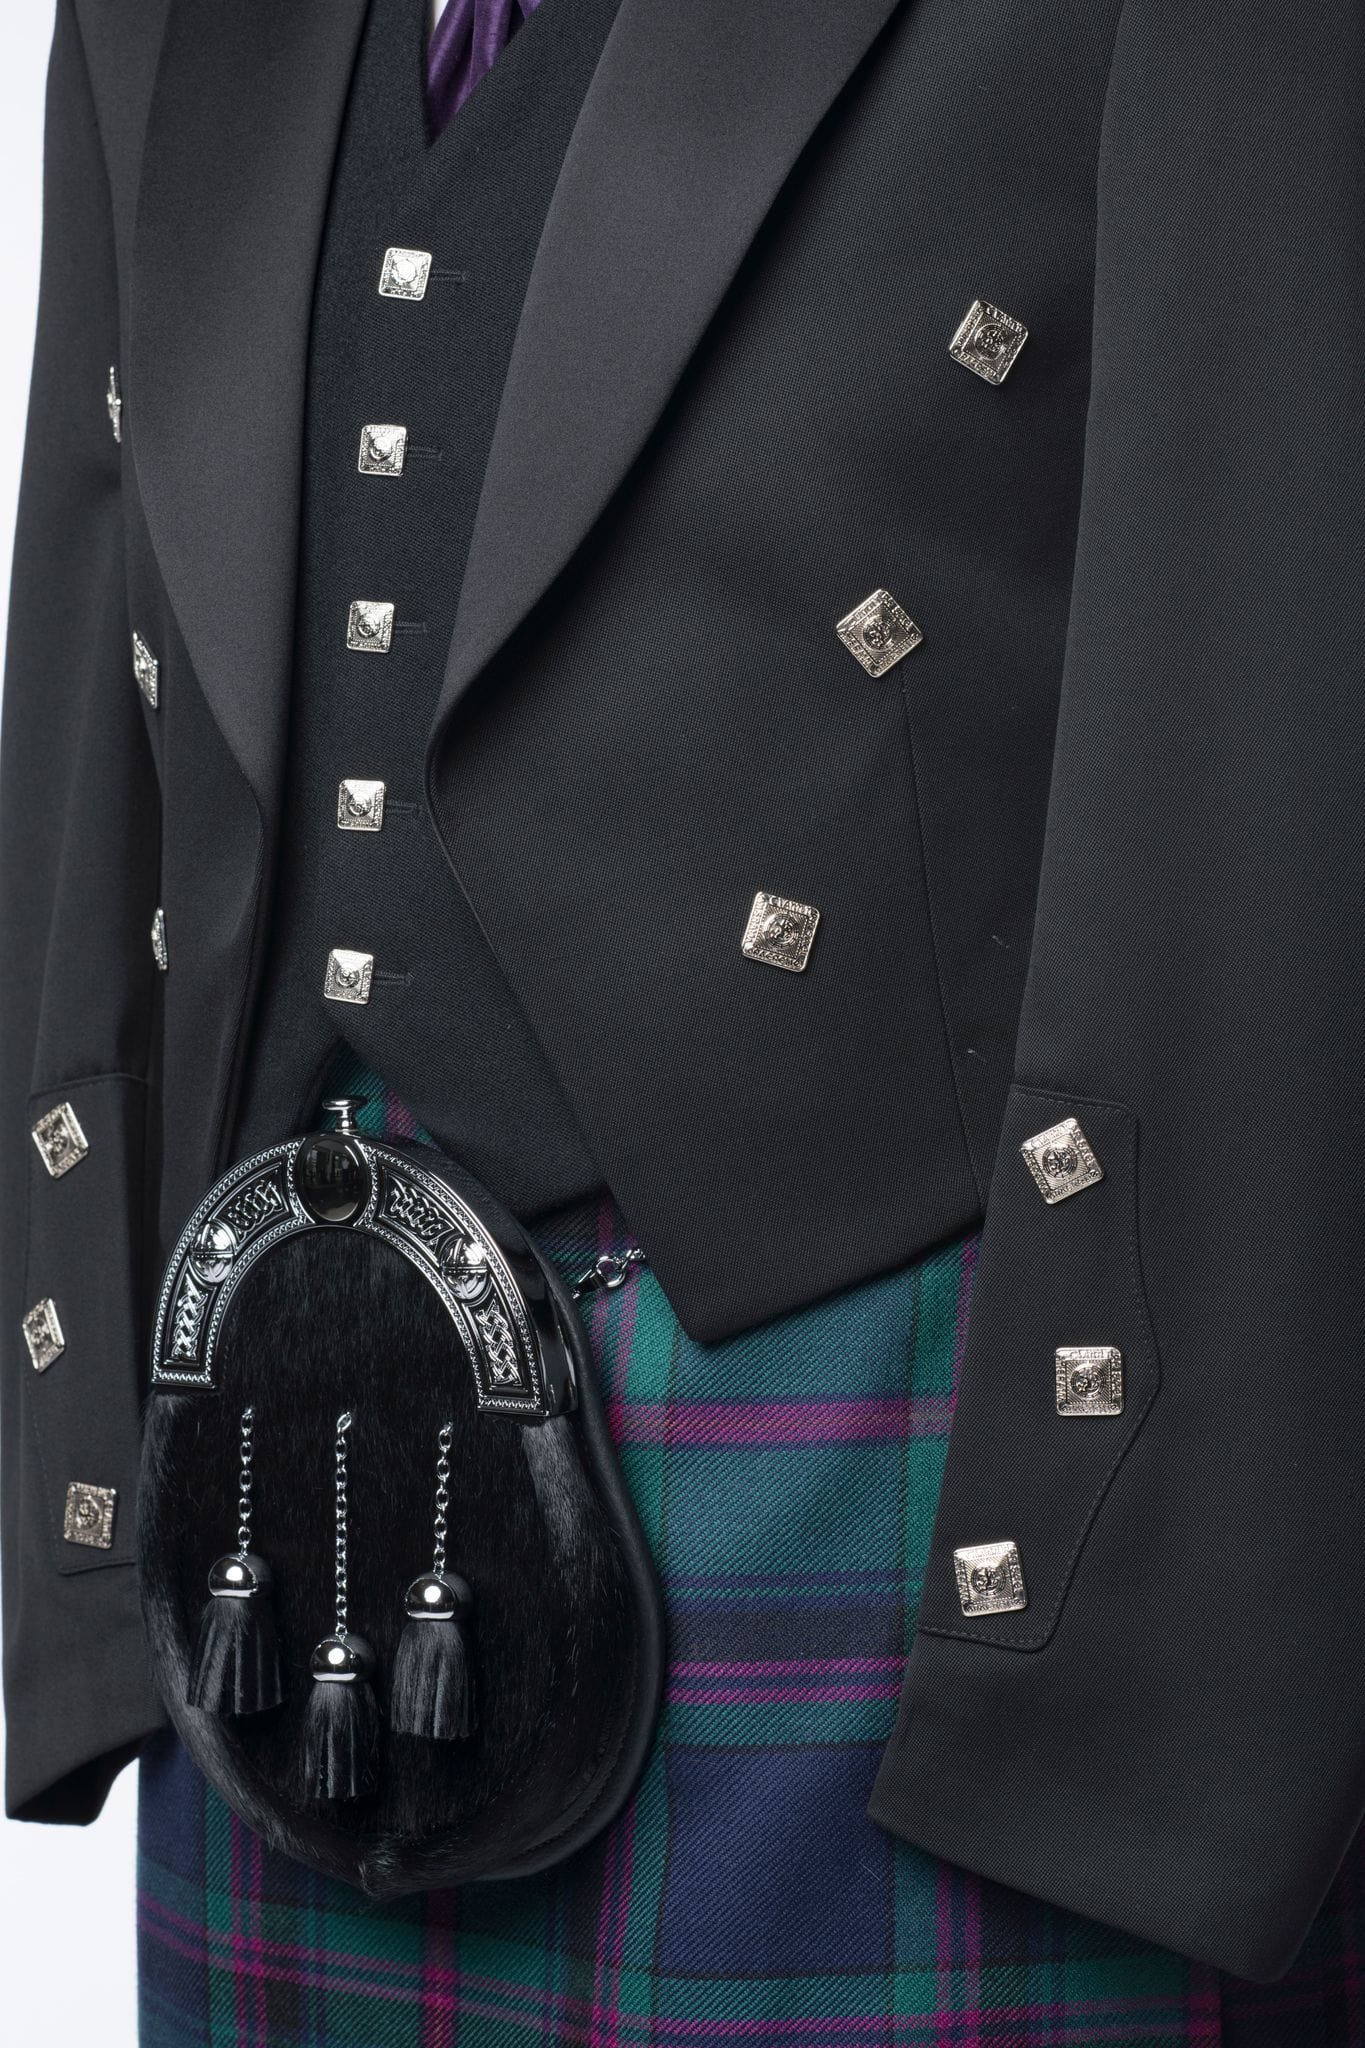 Prince Charlie Kilt Outfit With 5 Button Waistcoat - MacGregor and MacDuff